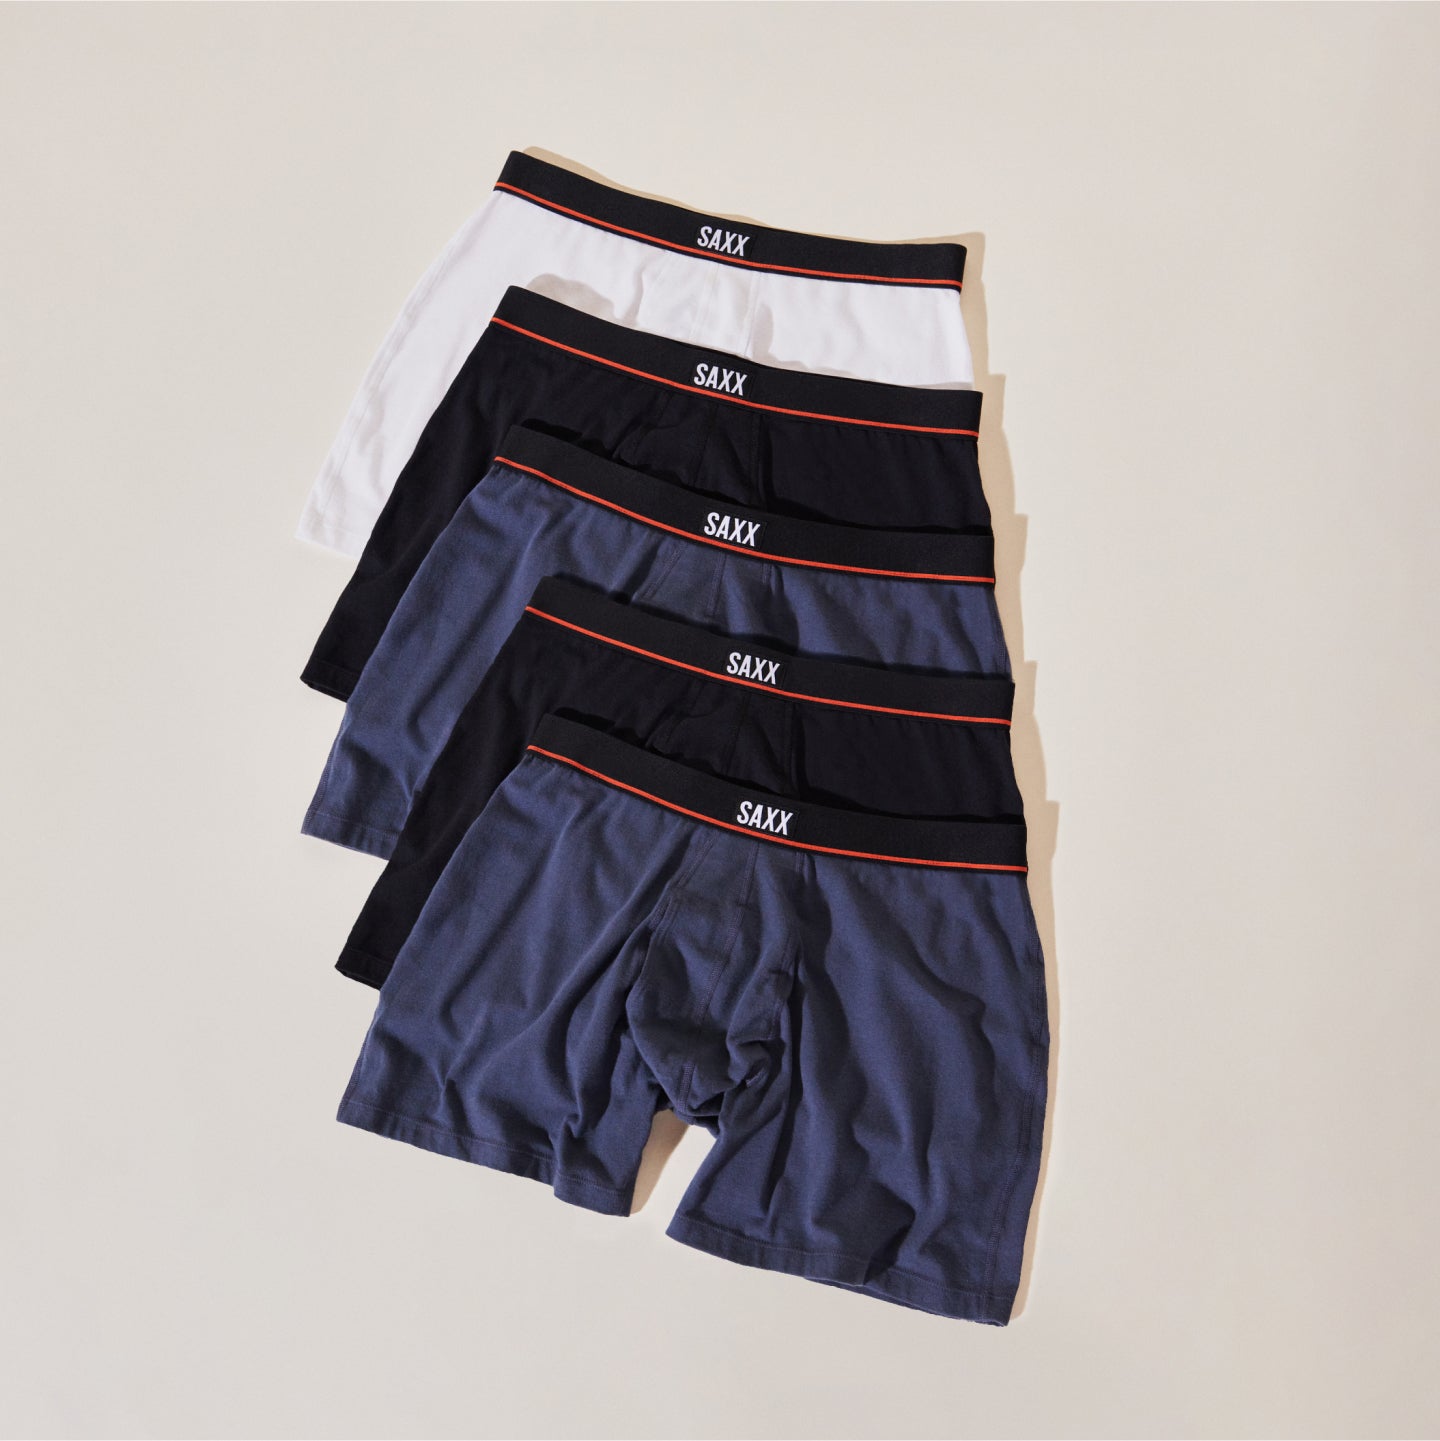 Five pairs of SAXX Boxer Briefs in White, Black and Navy stacked on top of each other